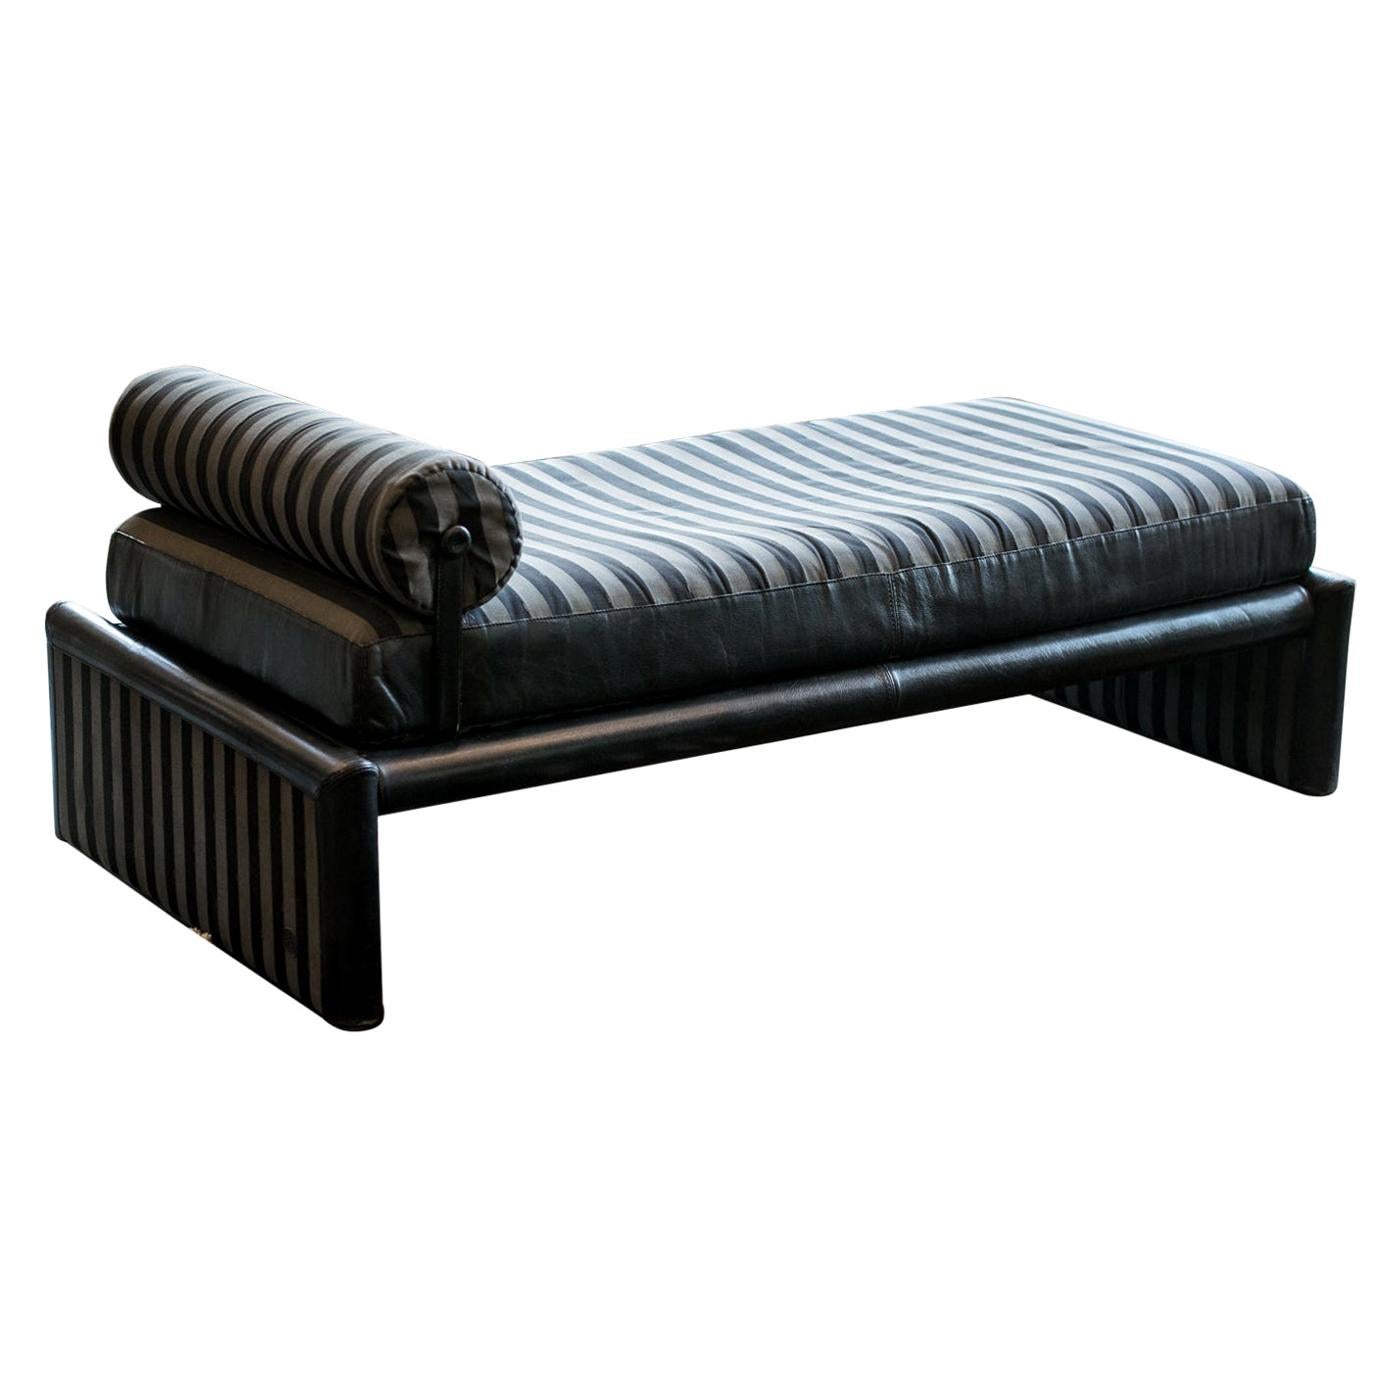 Fendi Daybed Chaise, Black Leather and Fendi Stripe, Italy, 1980s